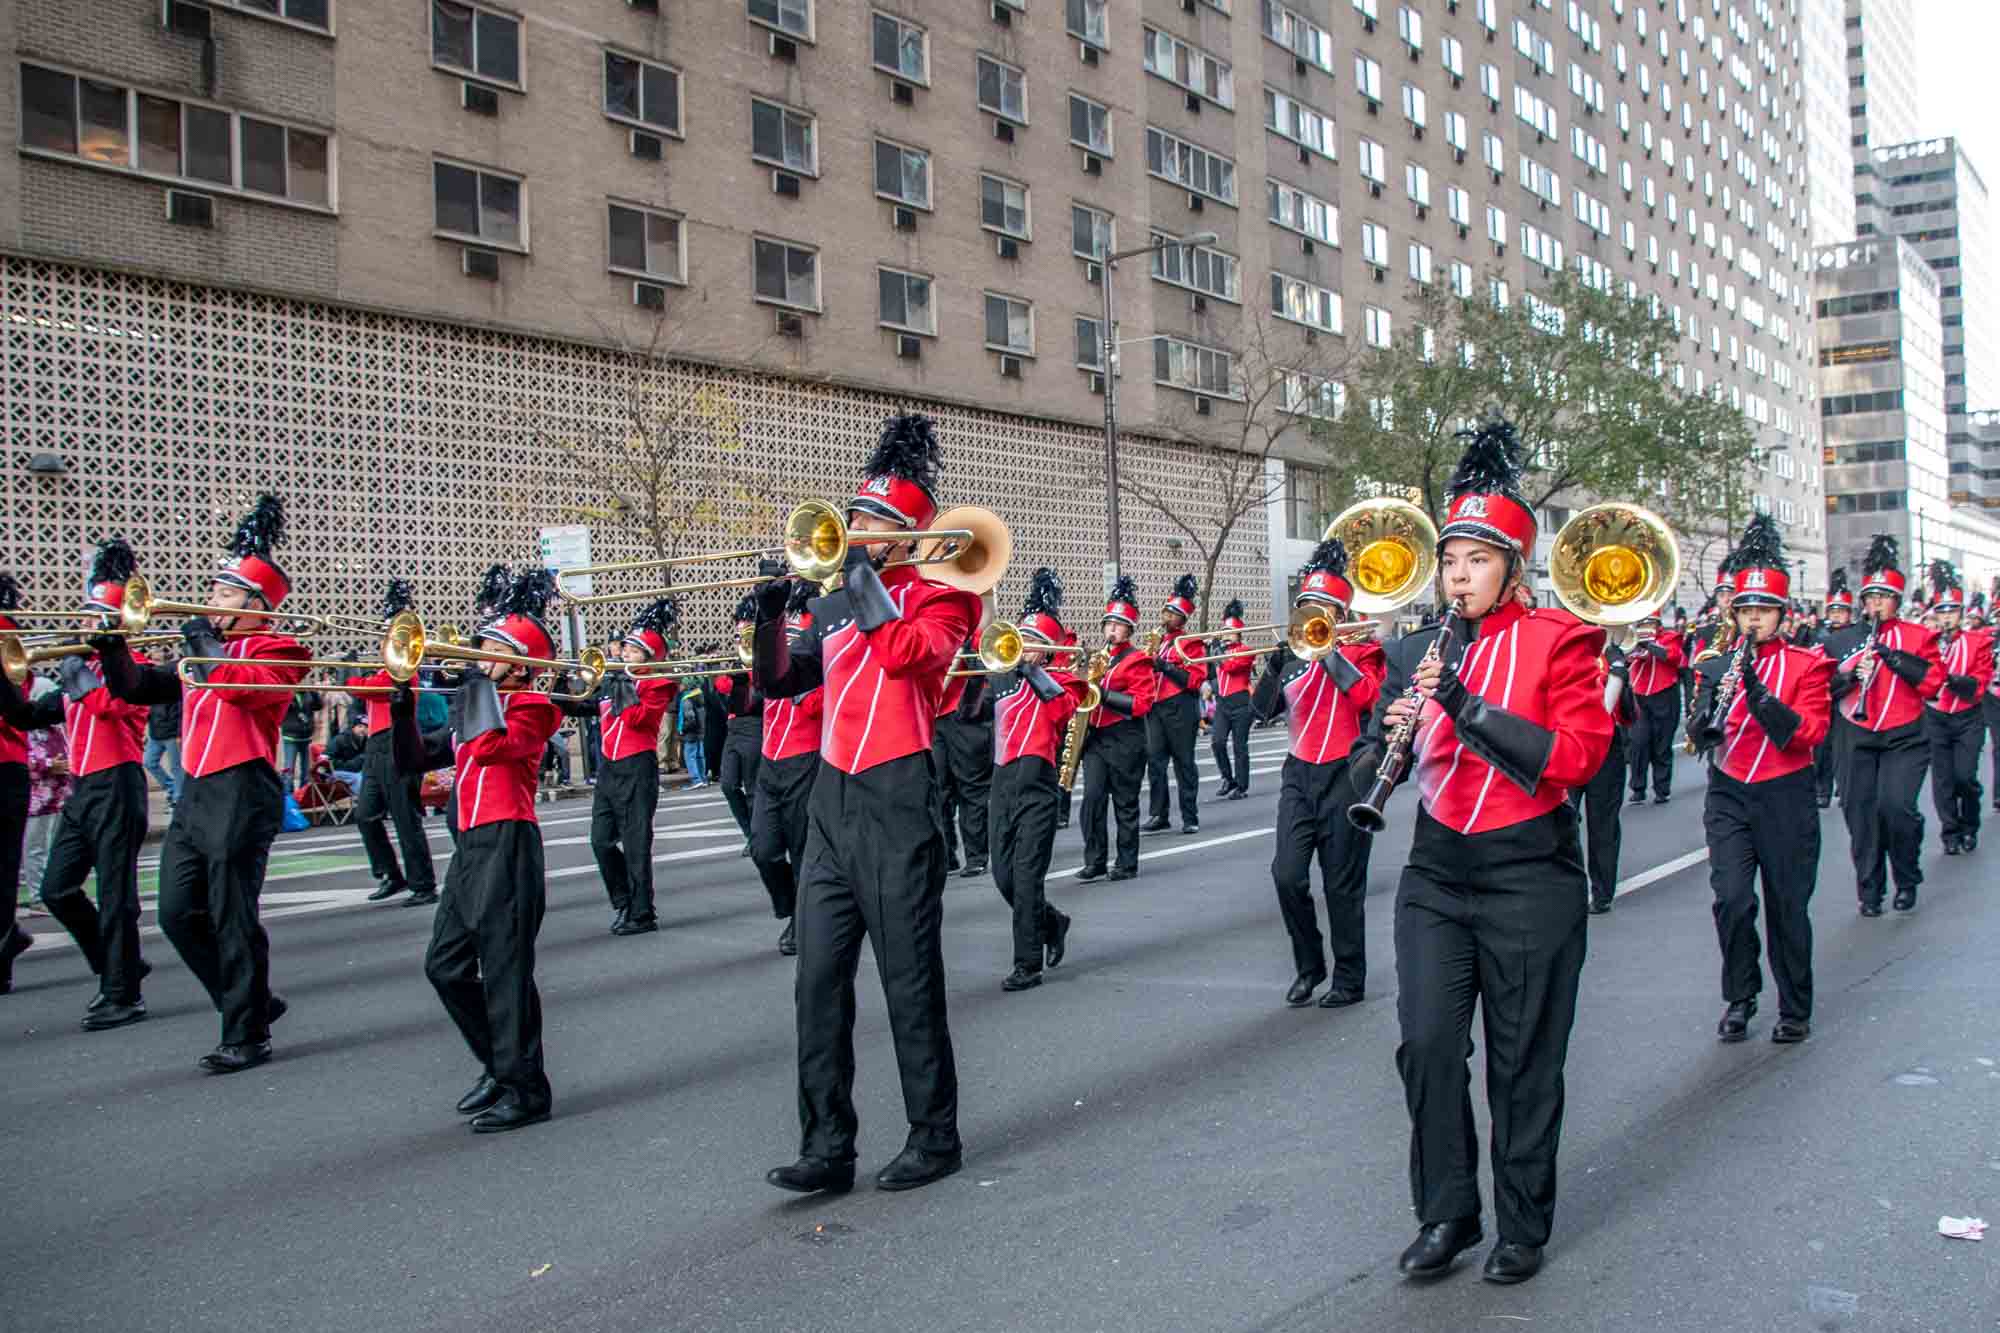 Marching band in parade with red and black uniforms